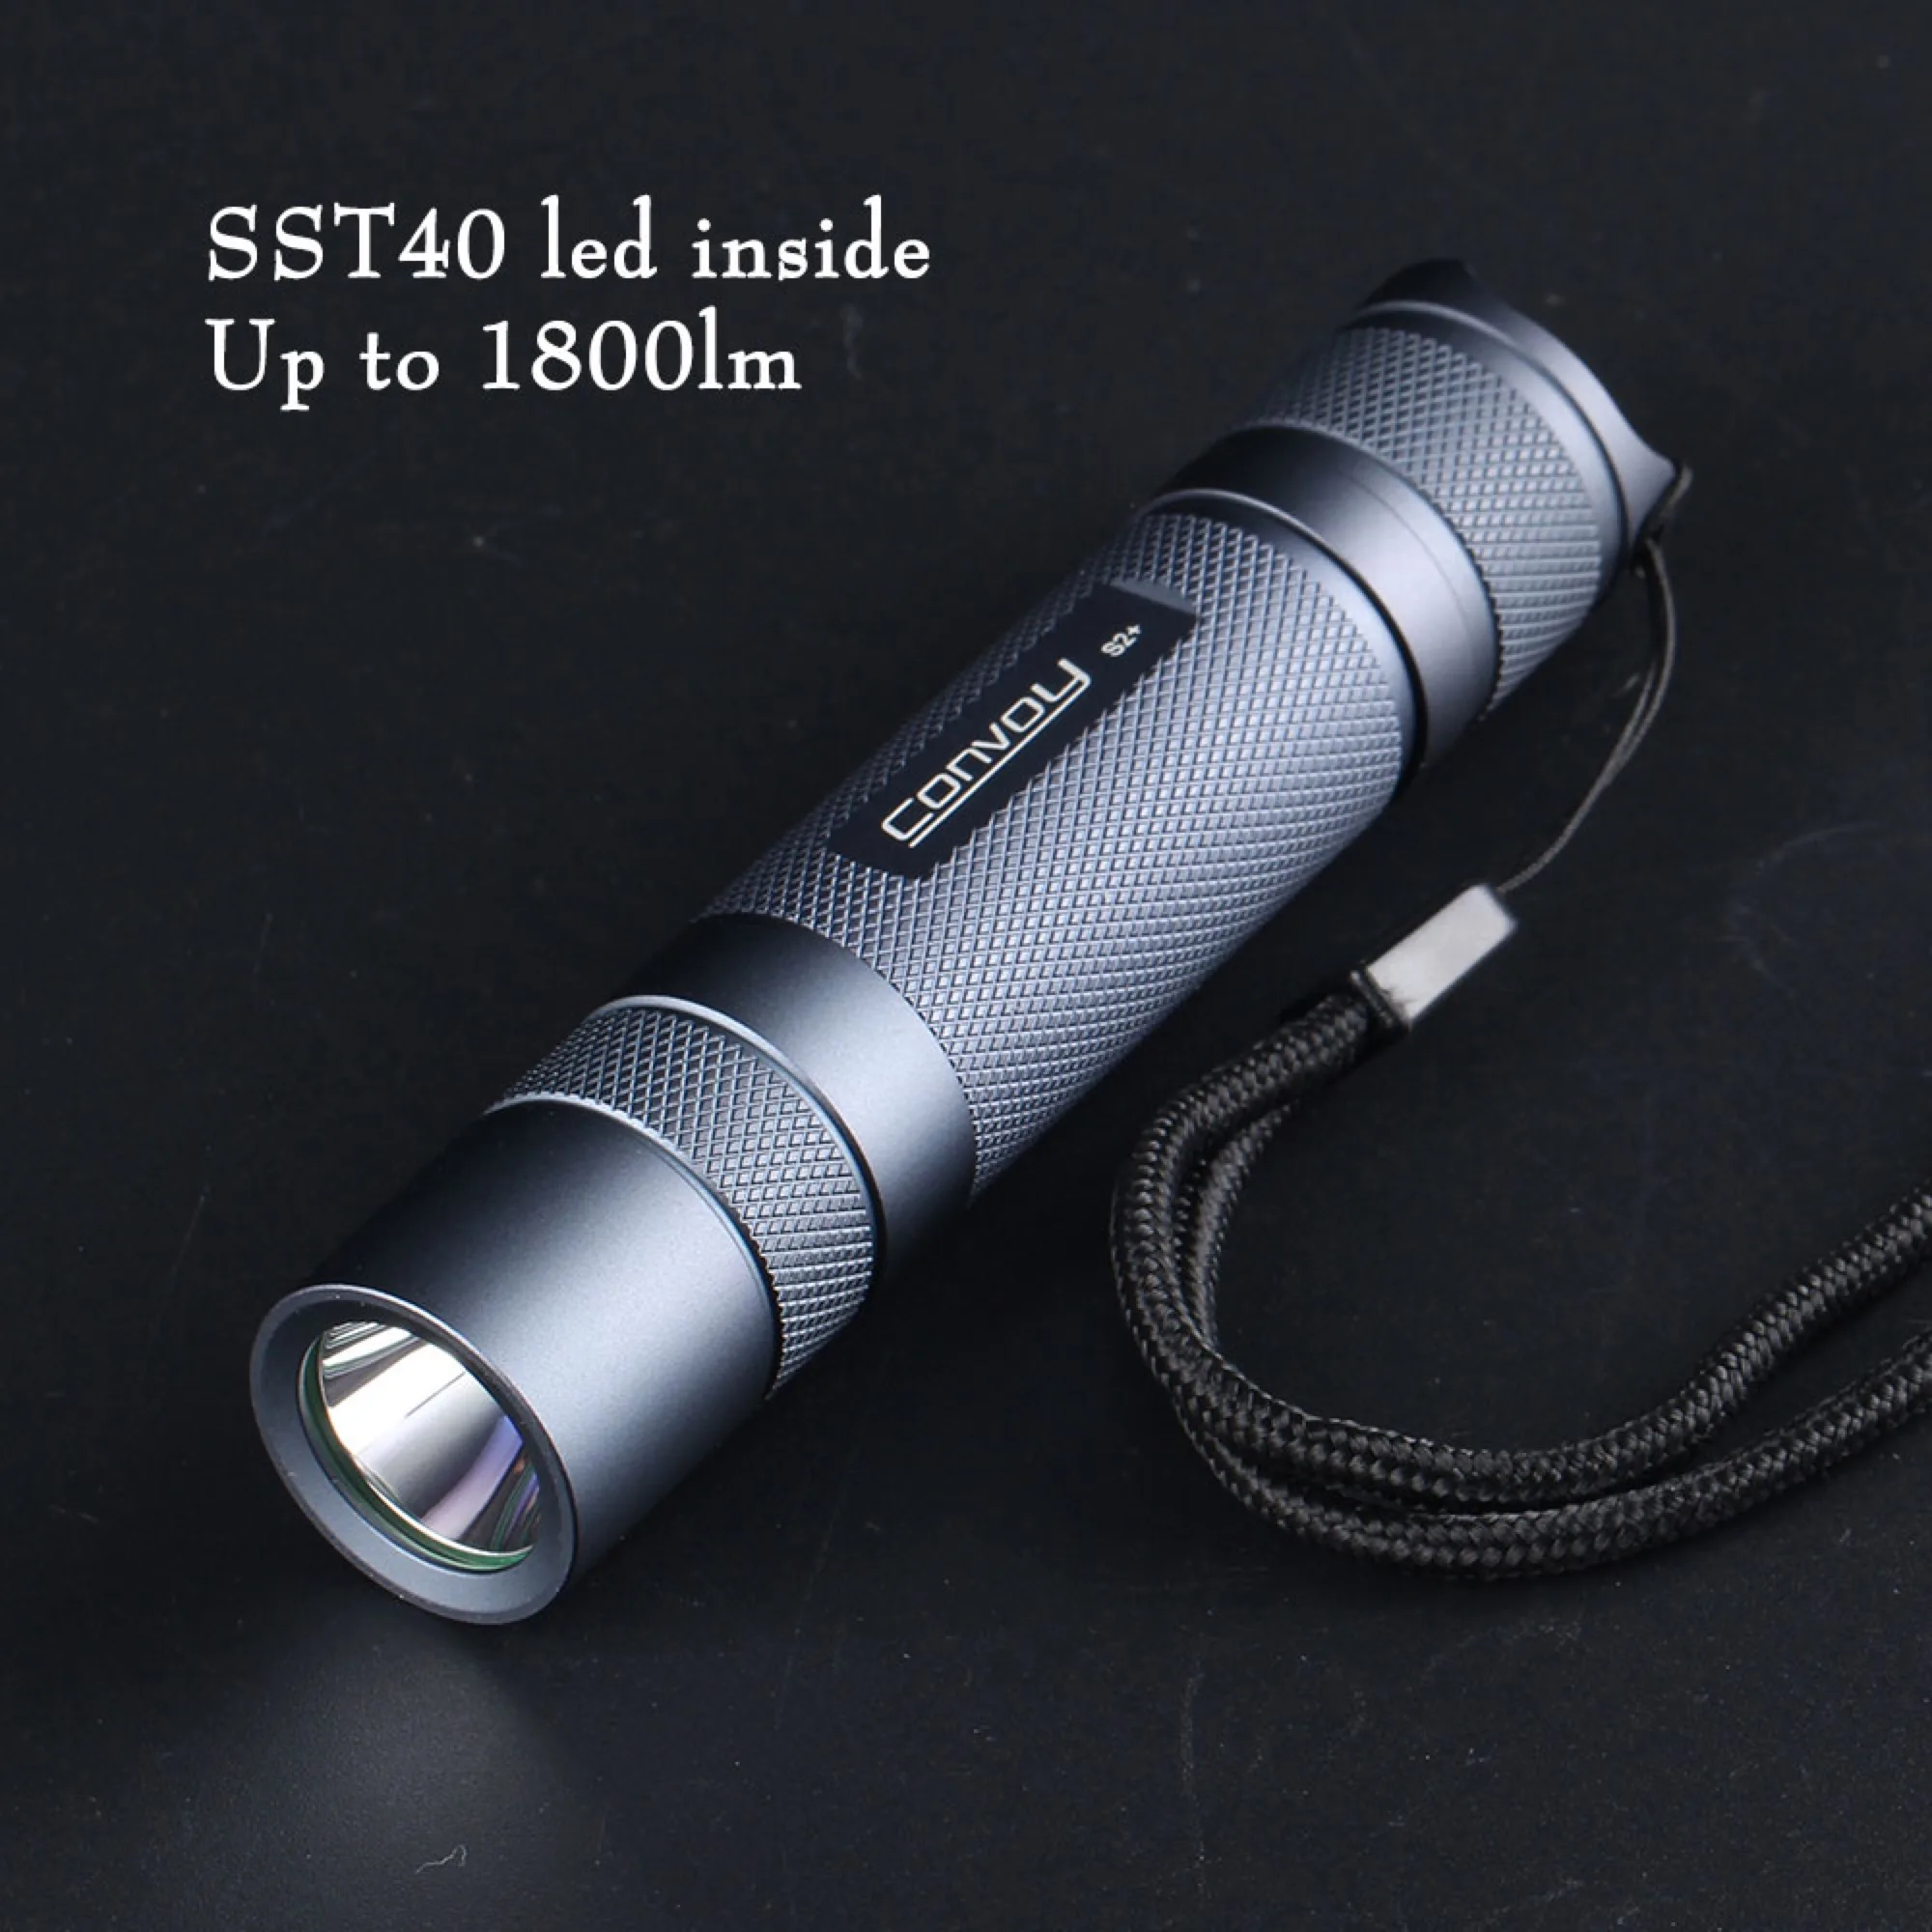 Wholesale コンボイS2SST40ハイパワー1800lm懐中電灯 From